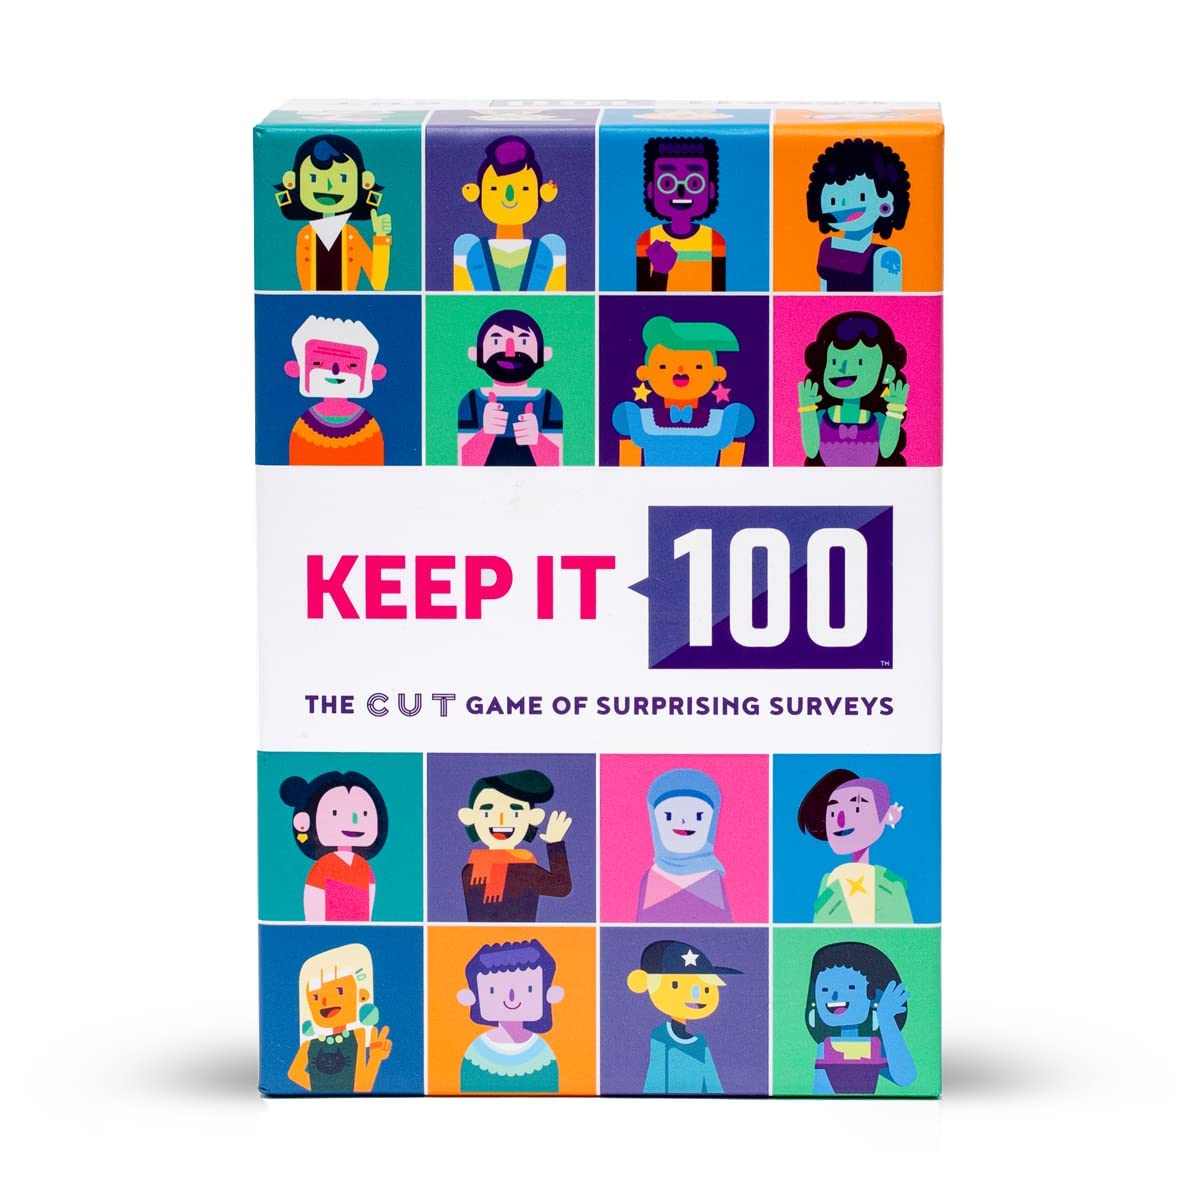 Amazon.com: Keep IT 100: The Card Game by Cut – Surprising Surveys ...